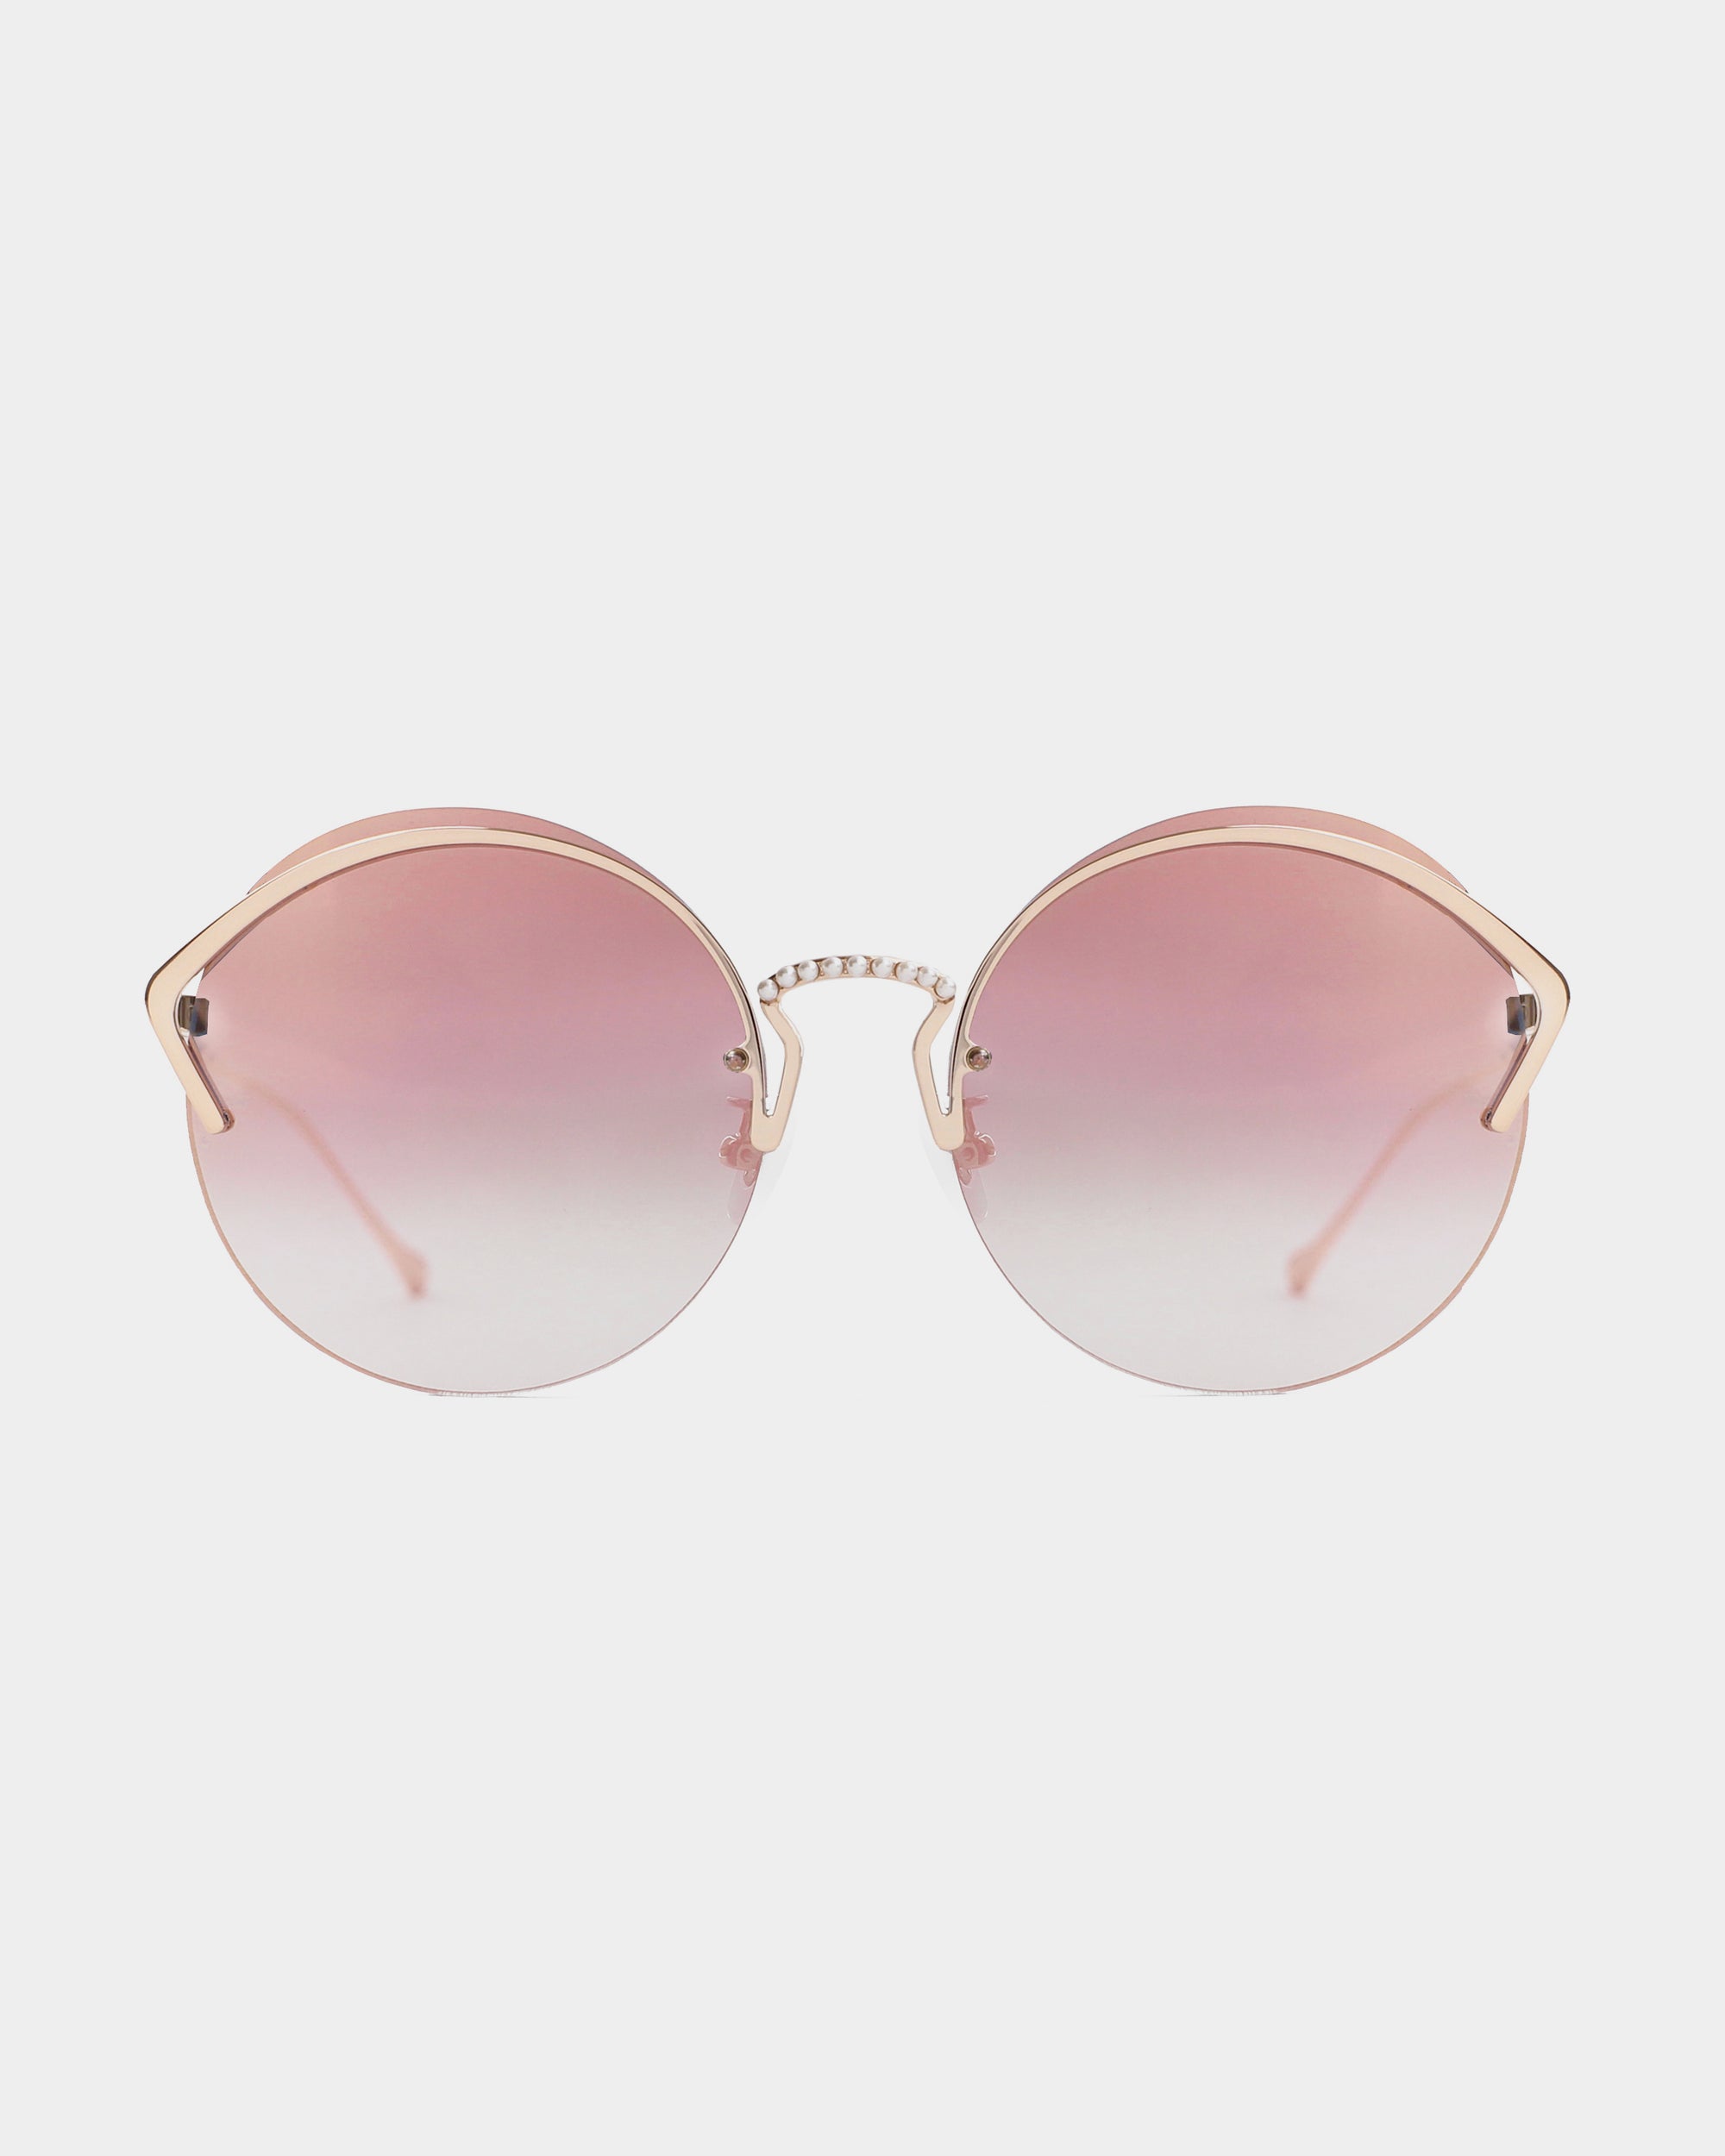 A pair of stylish, round, pink-tinted sunglasses with a gold frame is centered against a plain white background. The lenses have a gradient effect, fading from dark pink at the top to lighter pink at the bottom. These chic For Art&#39;s Sake® Margarita shades offer UV protection for your eyes all day long.